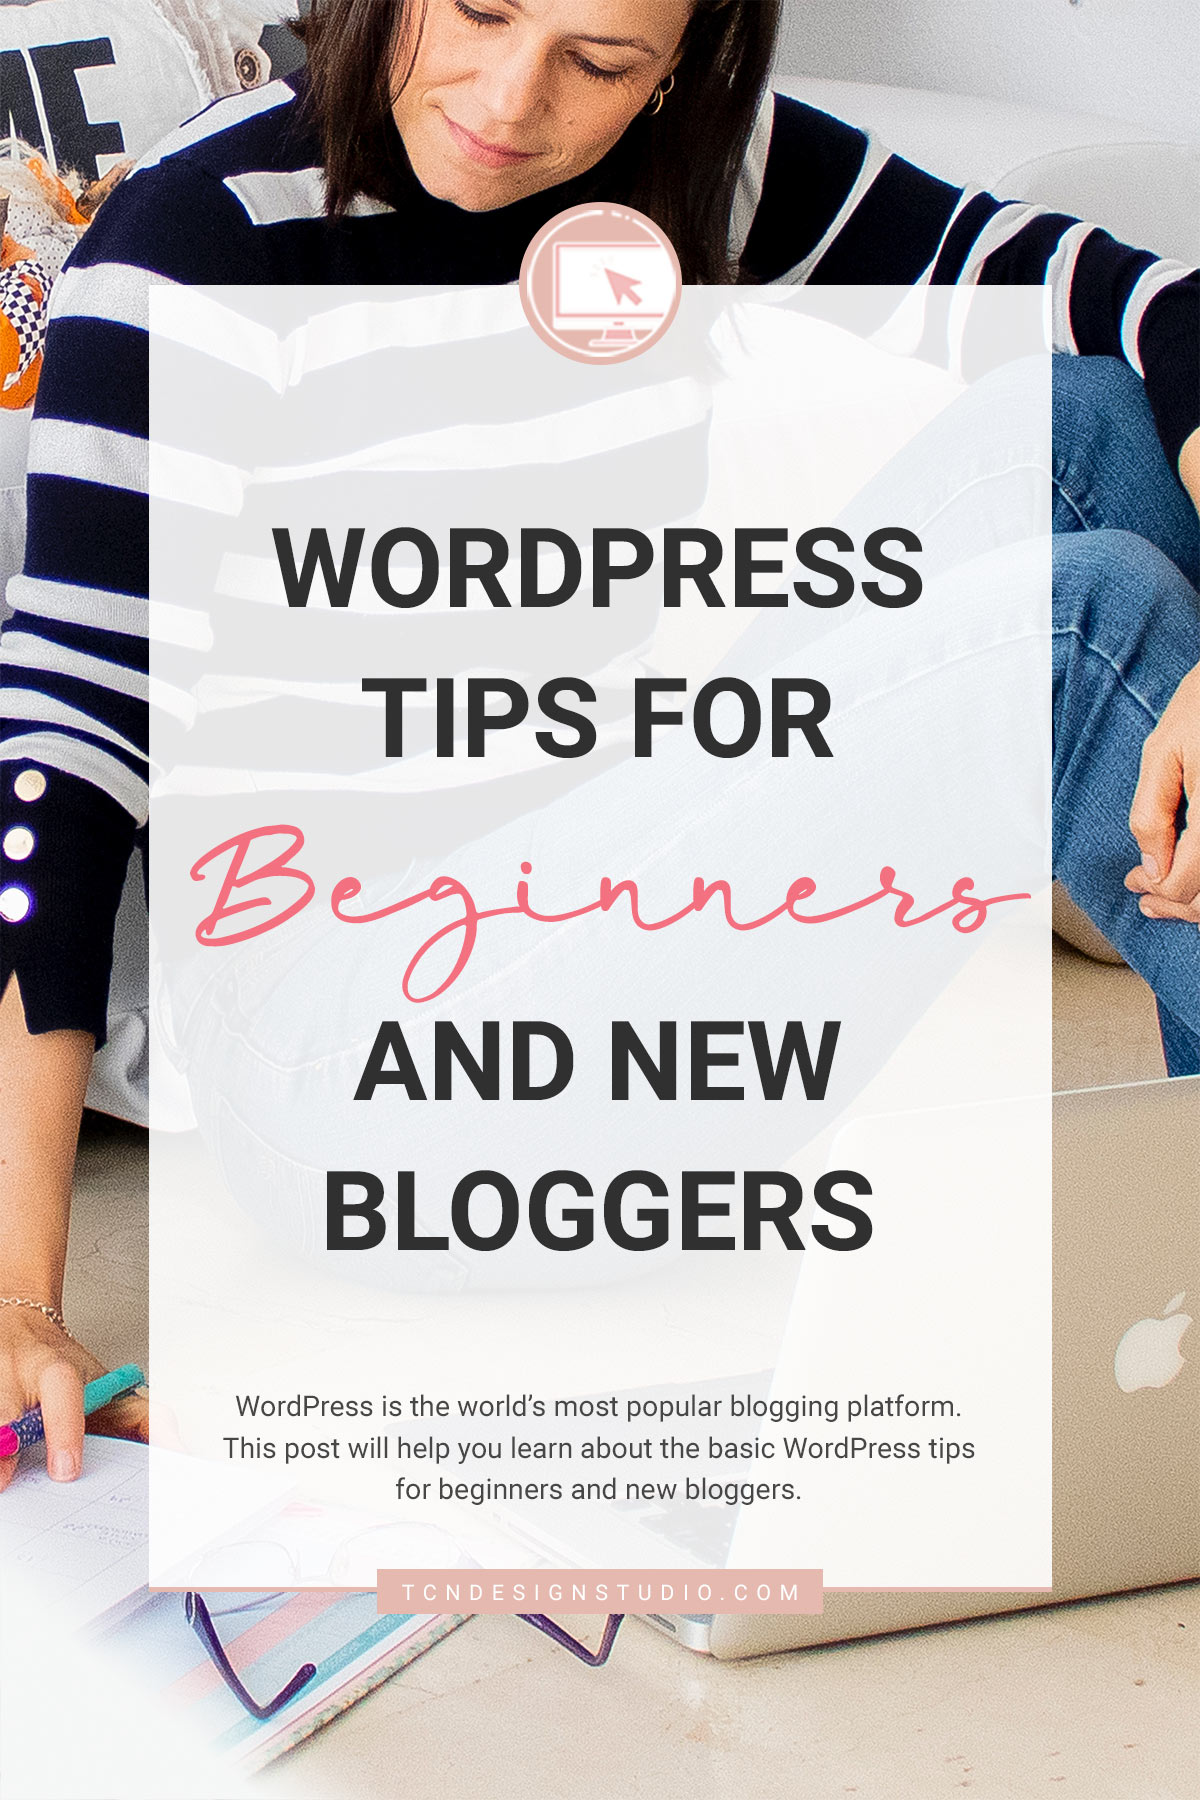 WordPress tips for beginners and new bloggers Cover Image photo background with Title text overlay